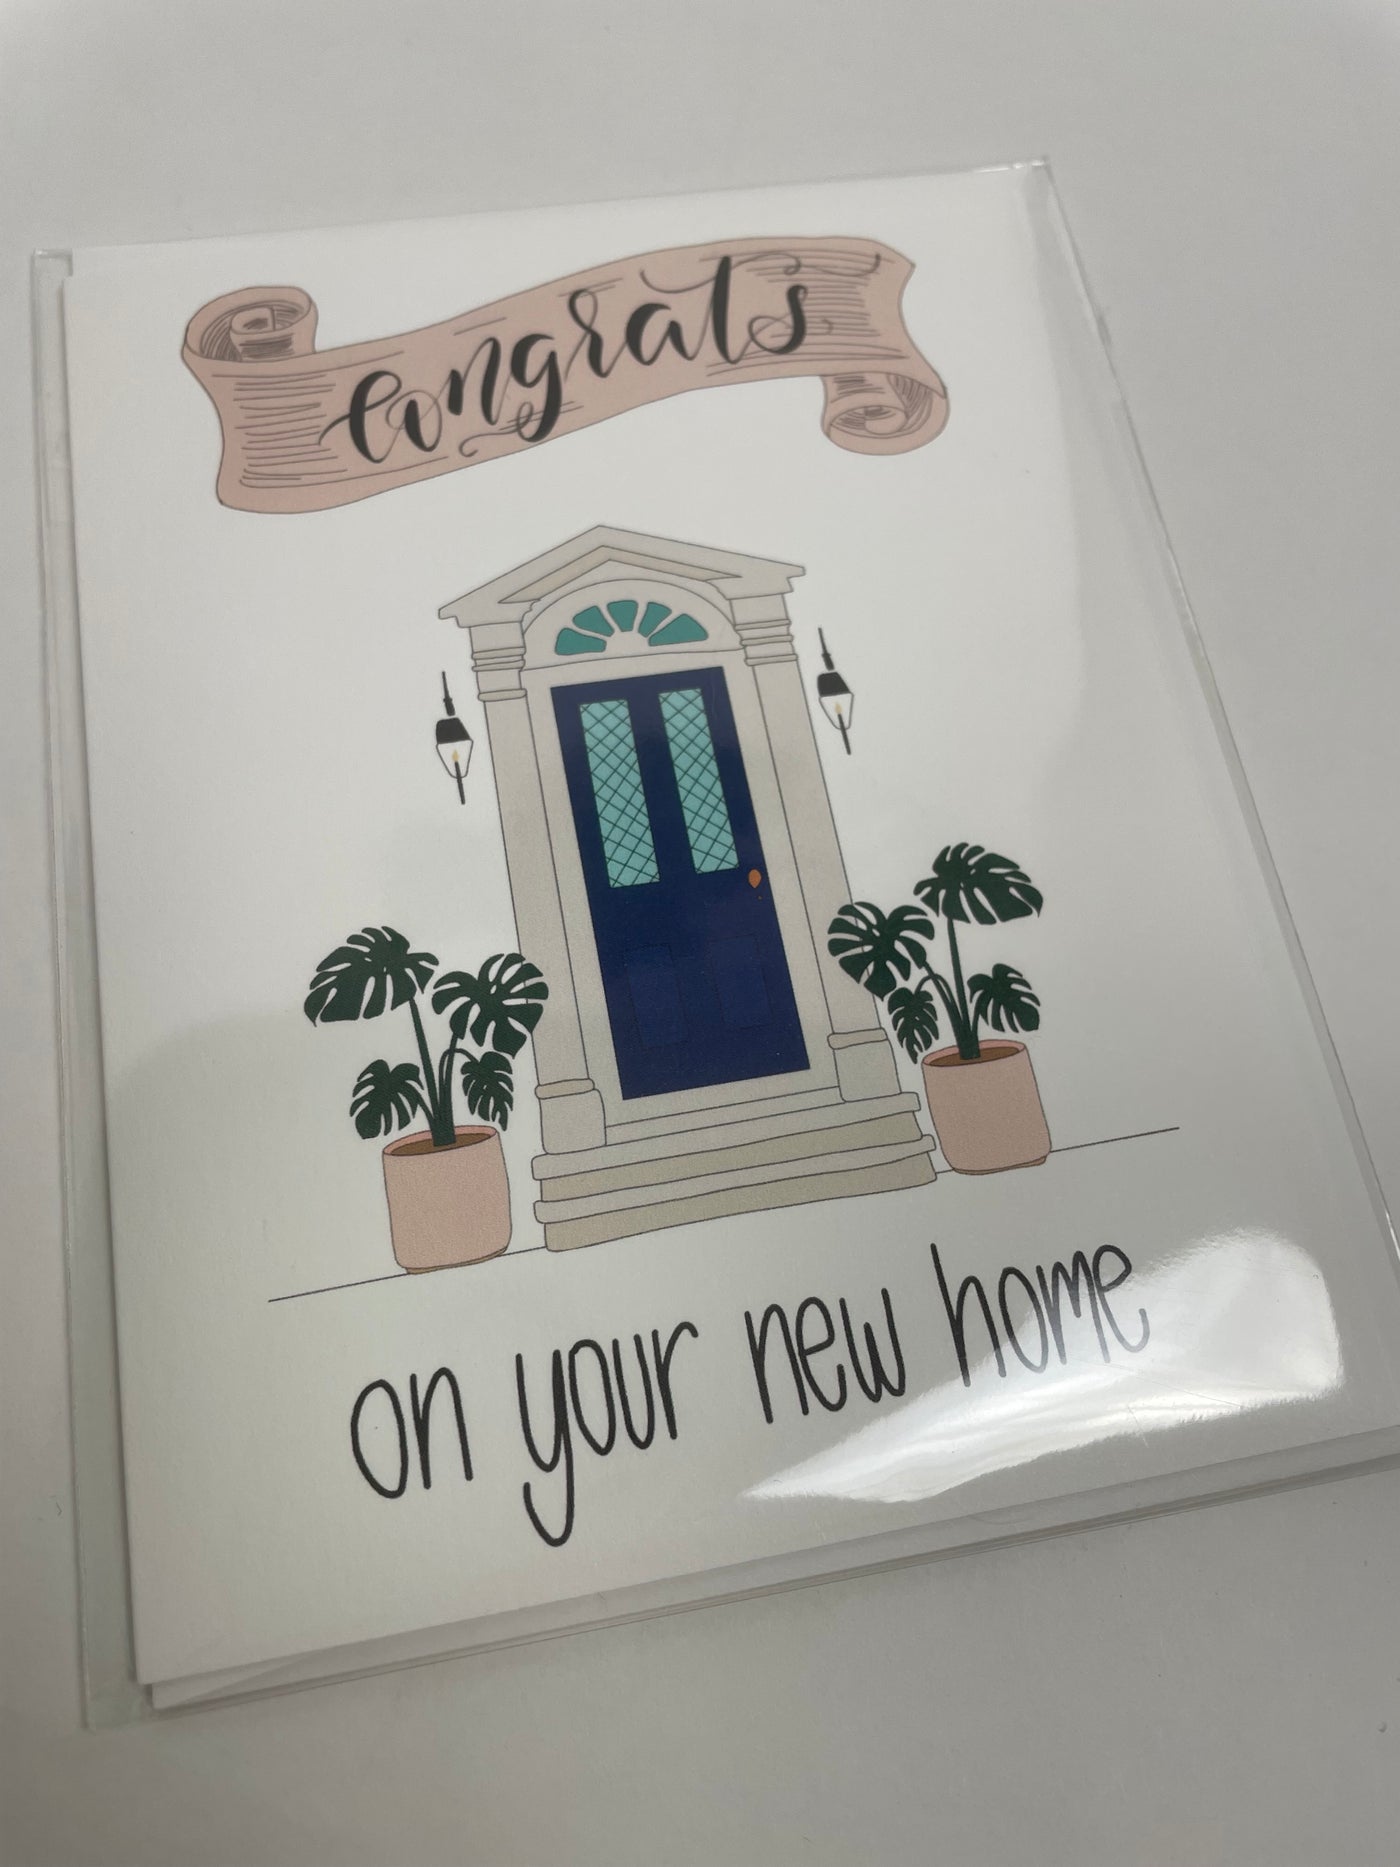 Congratulations on your new home card. Small Latina woman owned business New house card